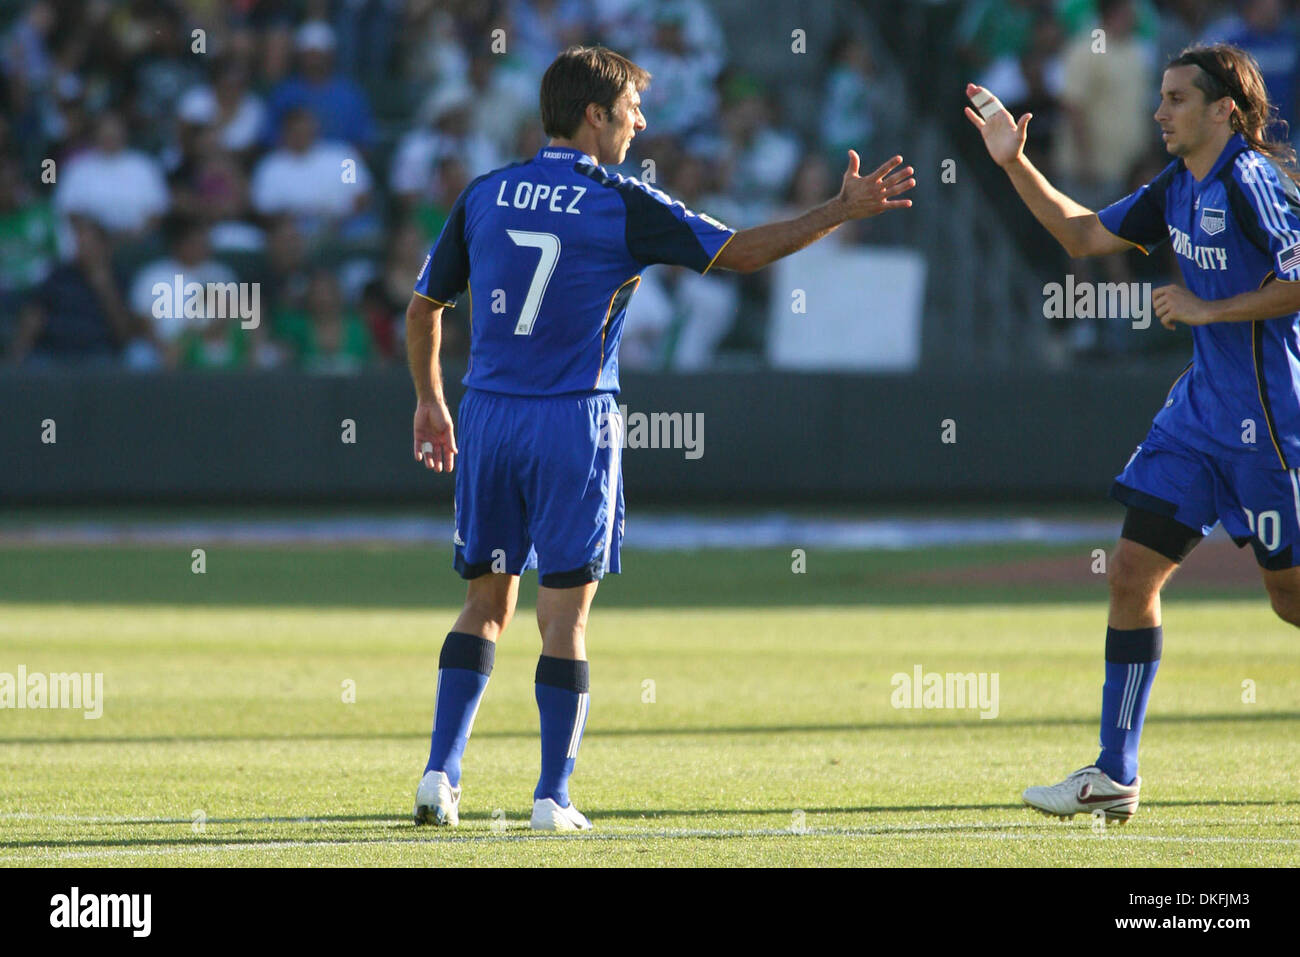 Jun 28, 2009 - Kansas City, Kansas, USA - Claudio Lopez #7 of the Kansas City Wizards is congratulated by Santiago Hirsig #10 after his goal in the 80th minute during the Santos Laguna vs Kansas City Wizards soccer match in the SuperLiga 2009 tournament play. Santos Laguna defeated the Kansas City Wizards 3-1 at CommunityAmerica Ballpark. (Credit Image: © Tyson Hofsommer/Southcreek Stock Photo